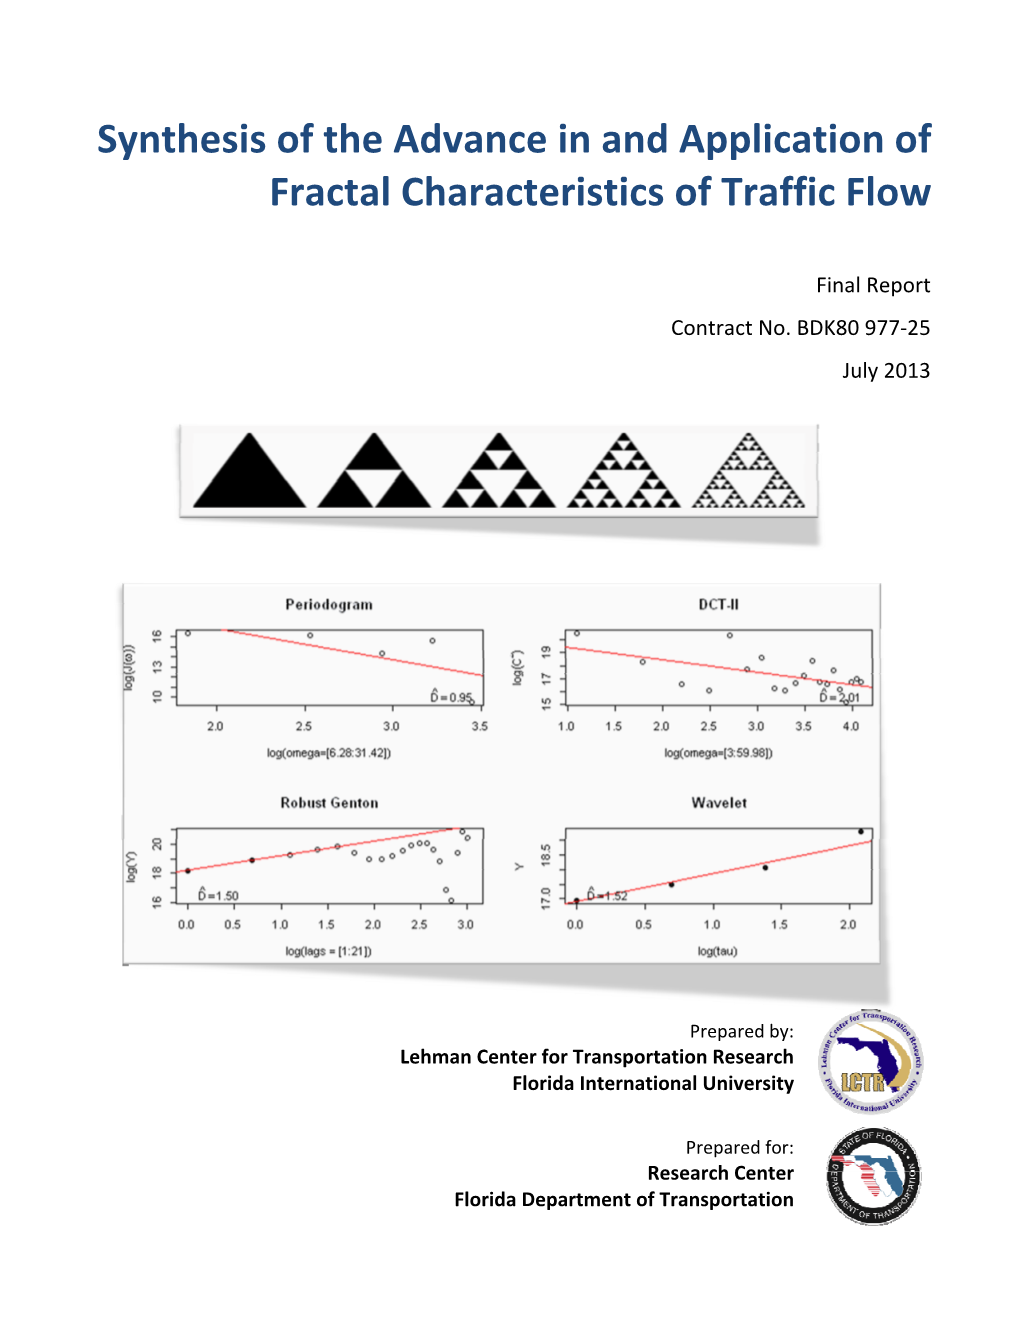 Synthesis of the Advance in and Application of Fractal Characteristics of Traffic Flow